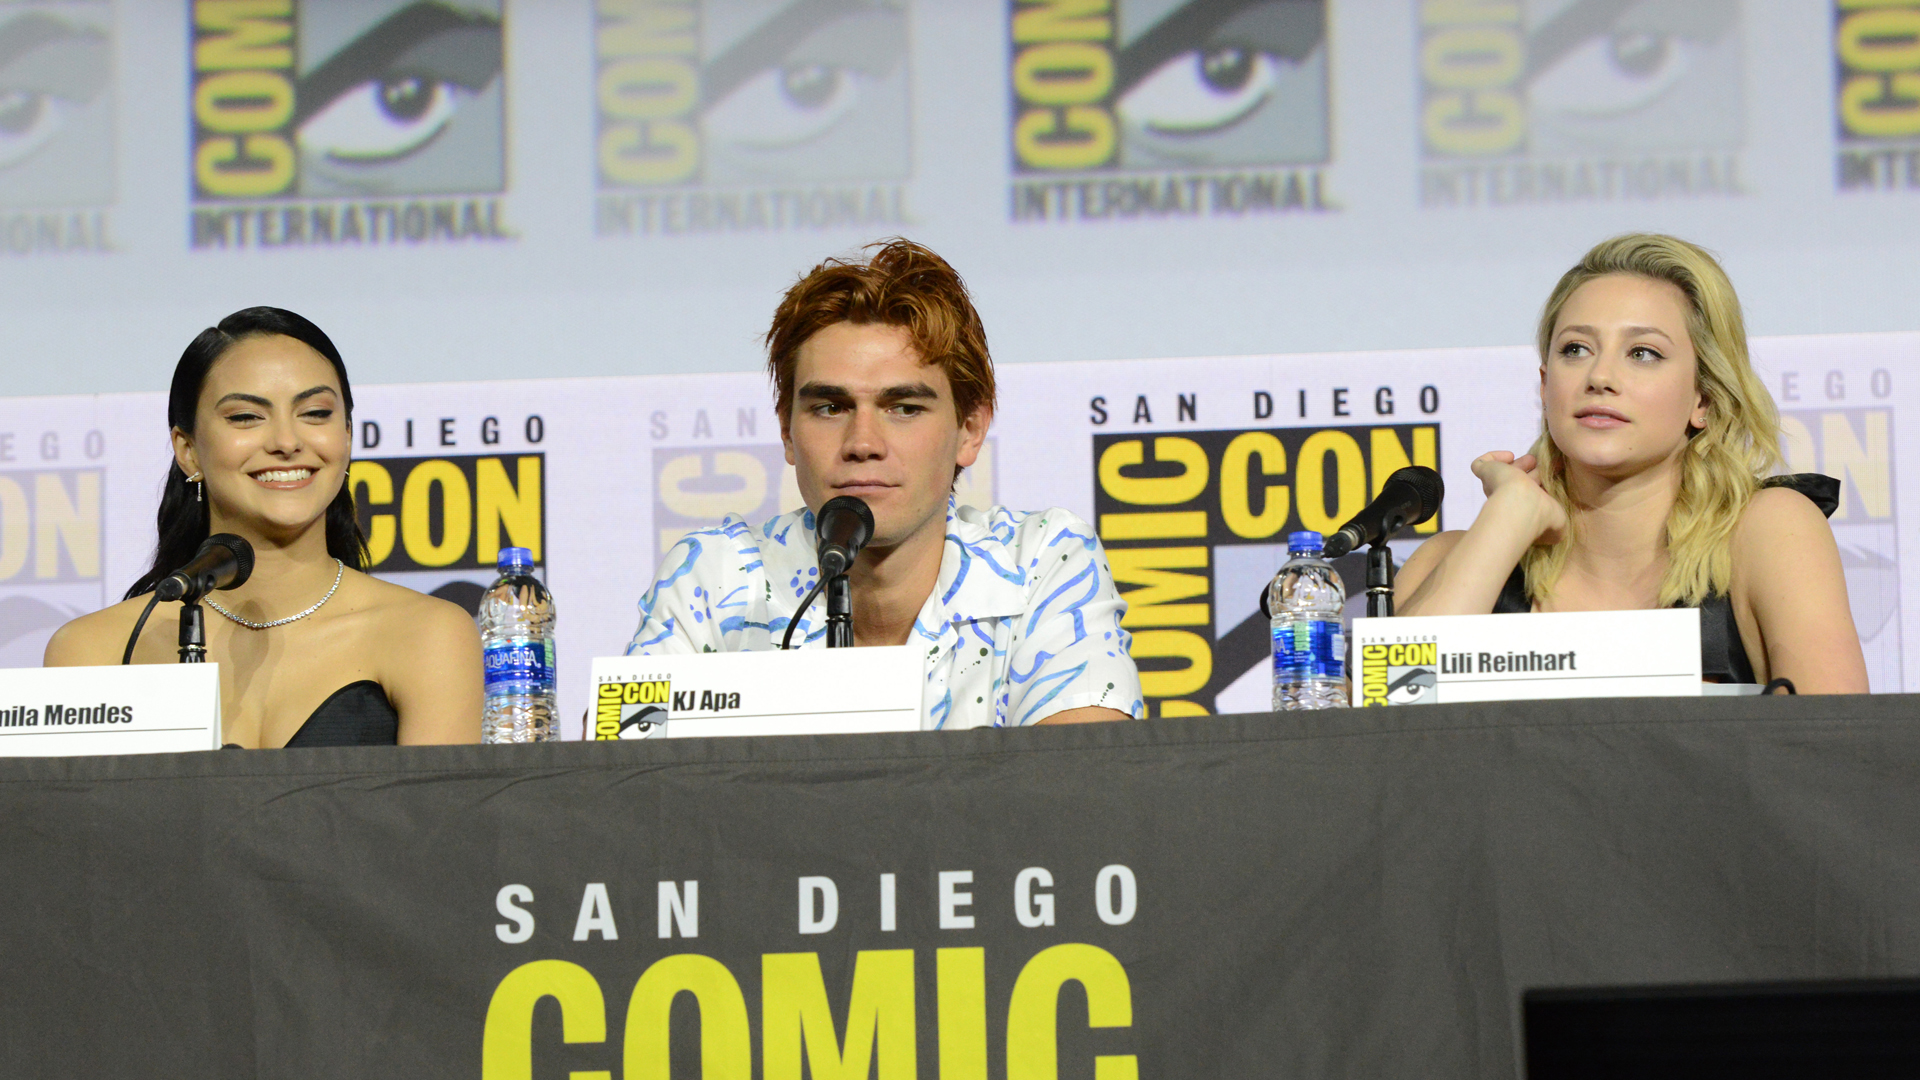 Camila Mendes (who plays Veronica Lodge), KJ Apa (who plays Archie Andrews), and Lili Reinhart (who plays Betty Cooper) speak at the "Riverdale" Special Video Presentation and Q&A during 2019 Comic-Con International at San Diego Convention Center on July 21, 2019 in San Diego, California.